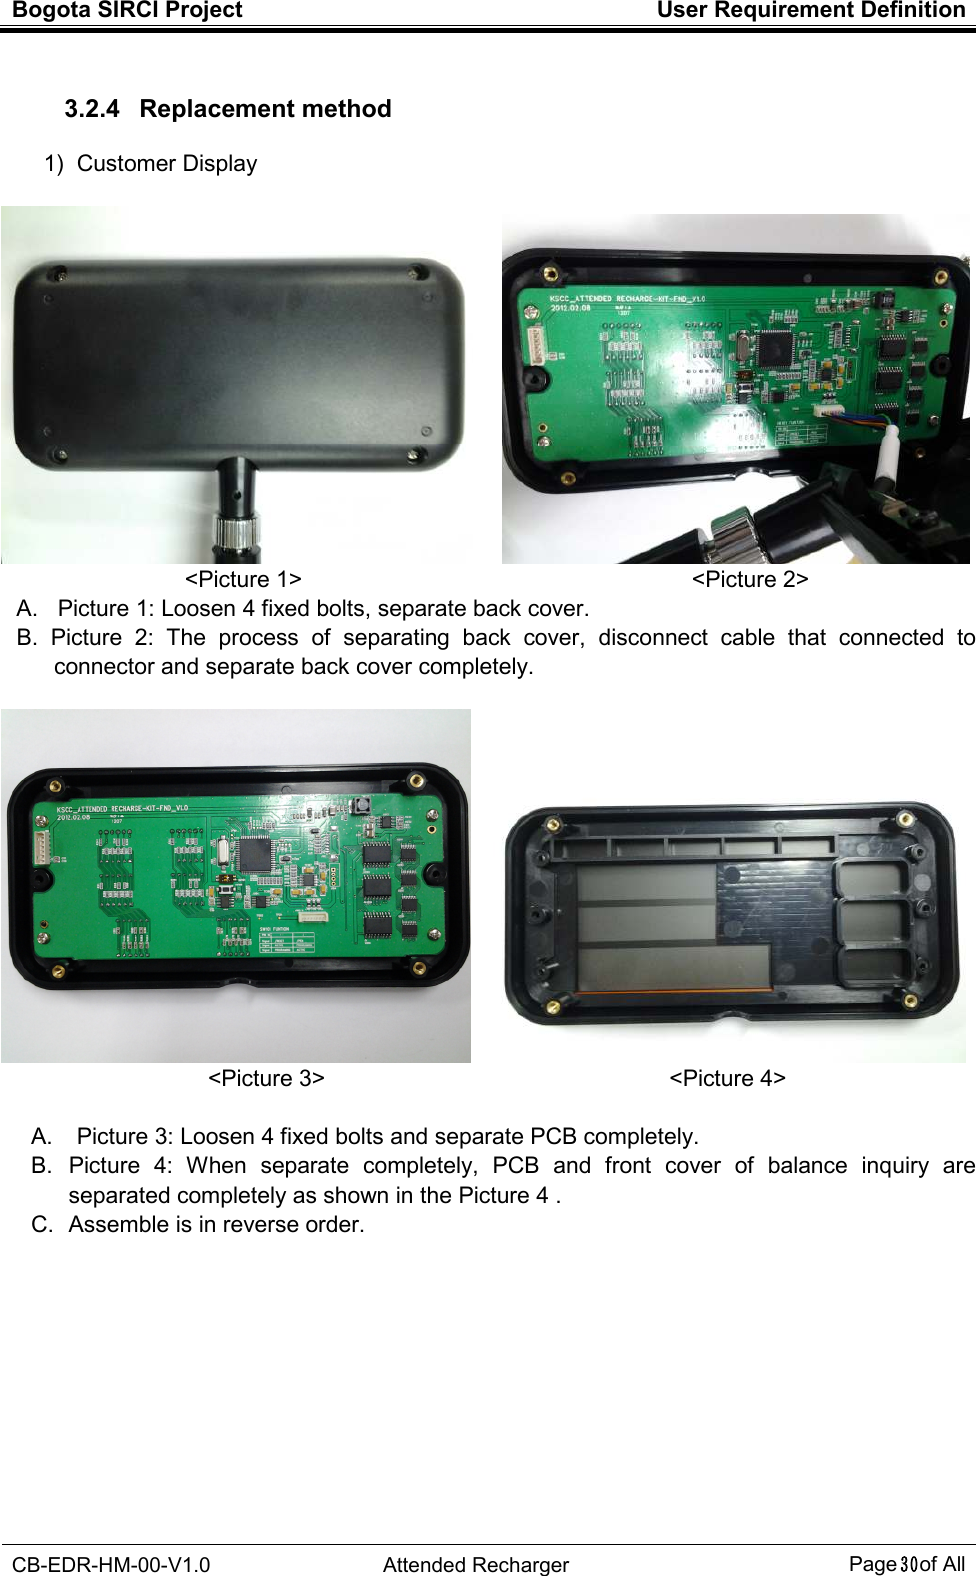 Bogota SIRCI Project  User Requirement Definition  CB-EDR-HM-00-V1.0  Attended Recharger Page３０ of All  3.2.4   Replacement method 1)  Customer Display       &lt;Picture 1&gt;                                                                    &lt;Picture 2&gt; A.   Picture 1: Loosen 4 fixed bolts, separate back cover. B.   Picture  2:  The  process  of  separating  back  cover,  disconnect  cable  that  connected  to connector and separate back cover completely.       &lt;Picture 3&gt;                                                            &lt;Picture 4&gt;  A.  Picture 3: Loosen 4 fixed bolts and separate PCB completely. B.  Picture  4:  When  separate  completely,  PCB  and  front  cover  of  balance  inquiry  are separated completely as shown in the Picture 4 . C.  Assemble is in reverse order.          